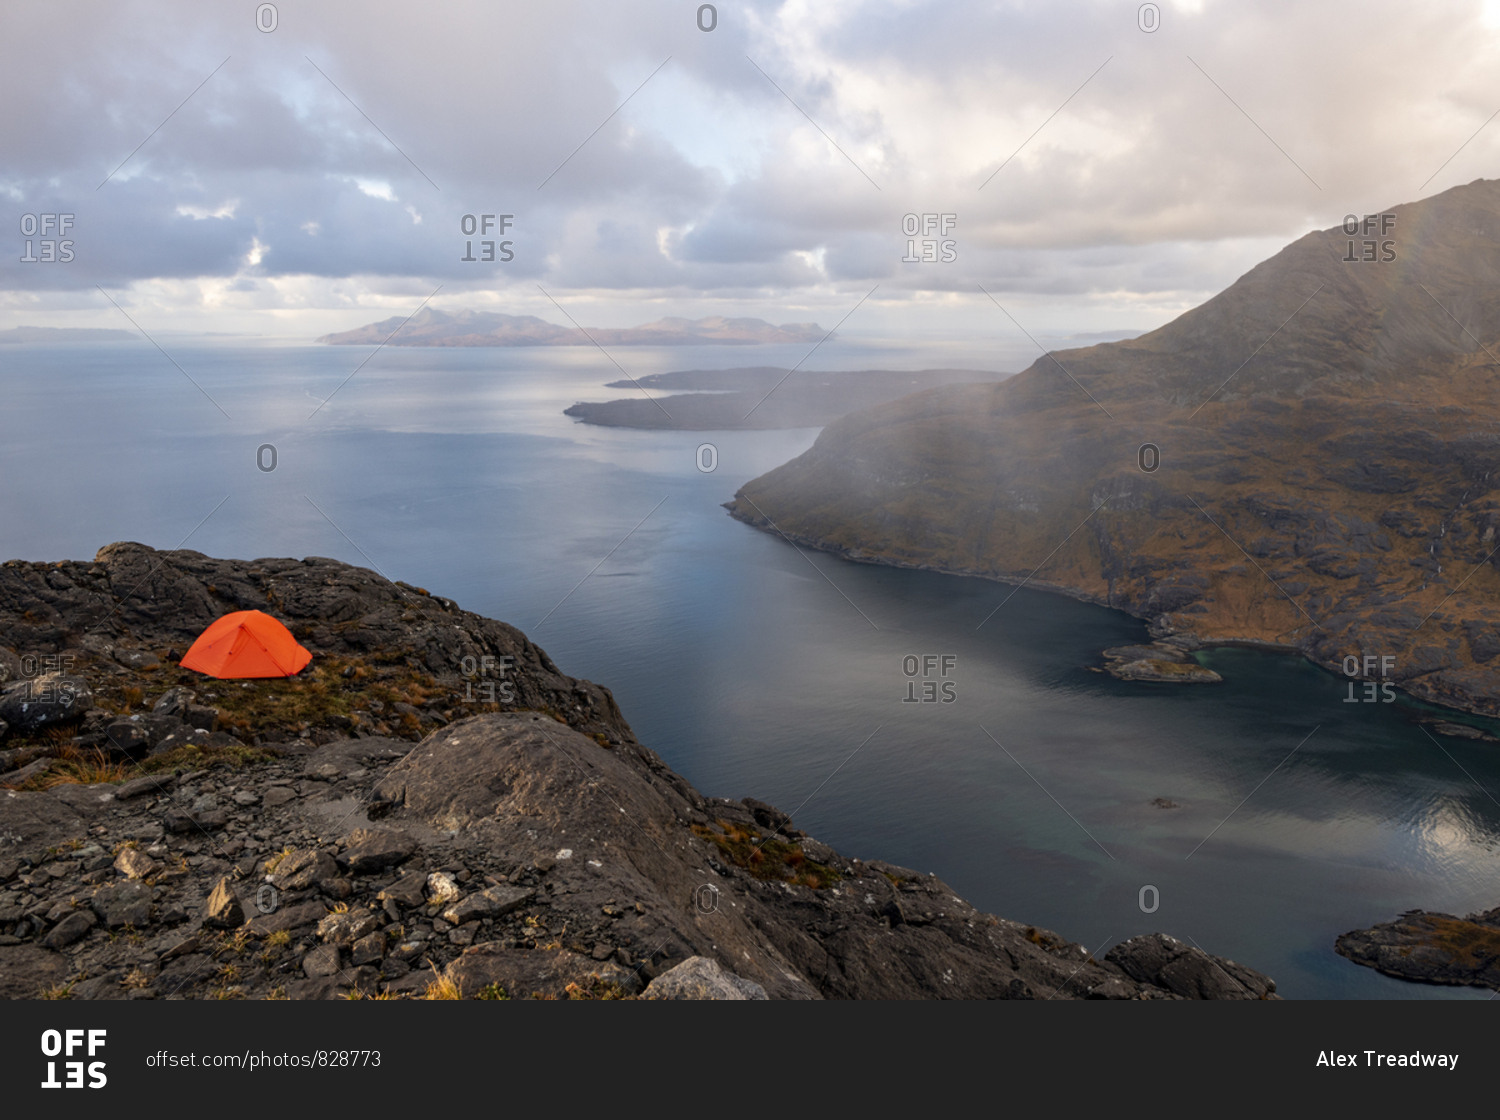 Wild camping on Sgurr Na Stri on the Isle of Skye in the Scottish Highlands with views towards Loch Coruisk and the main Cuillin ridge